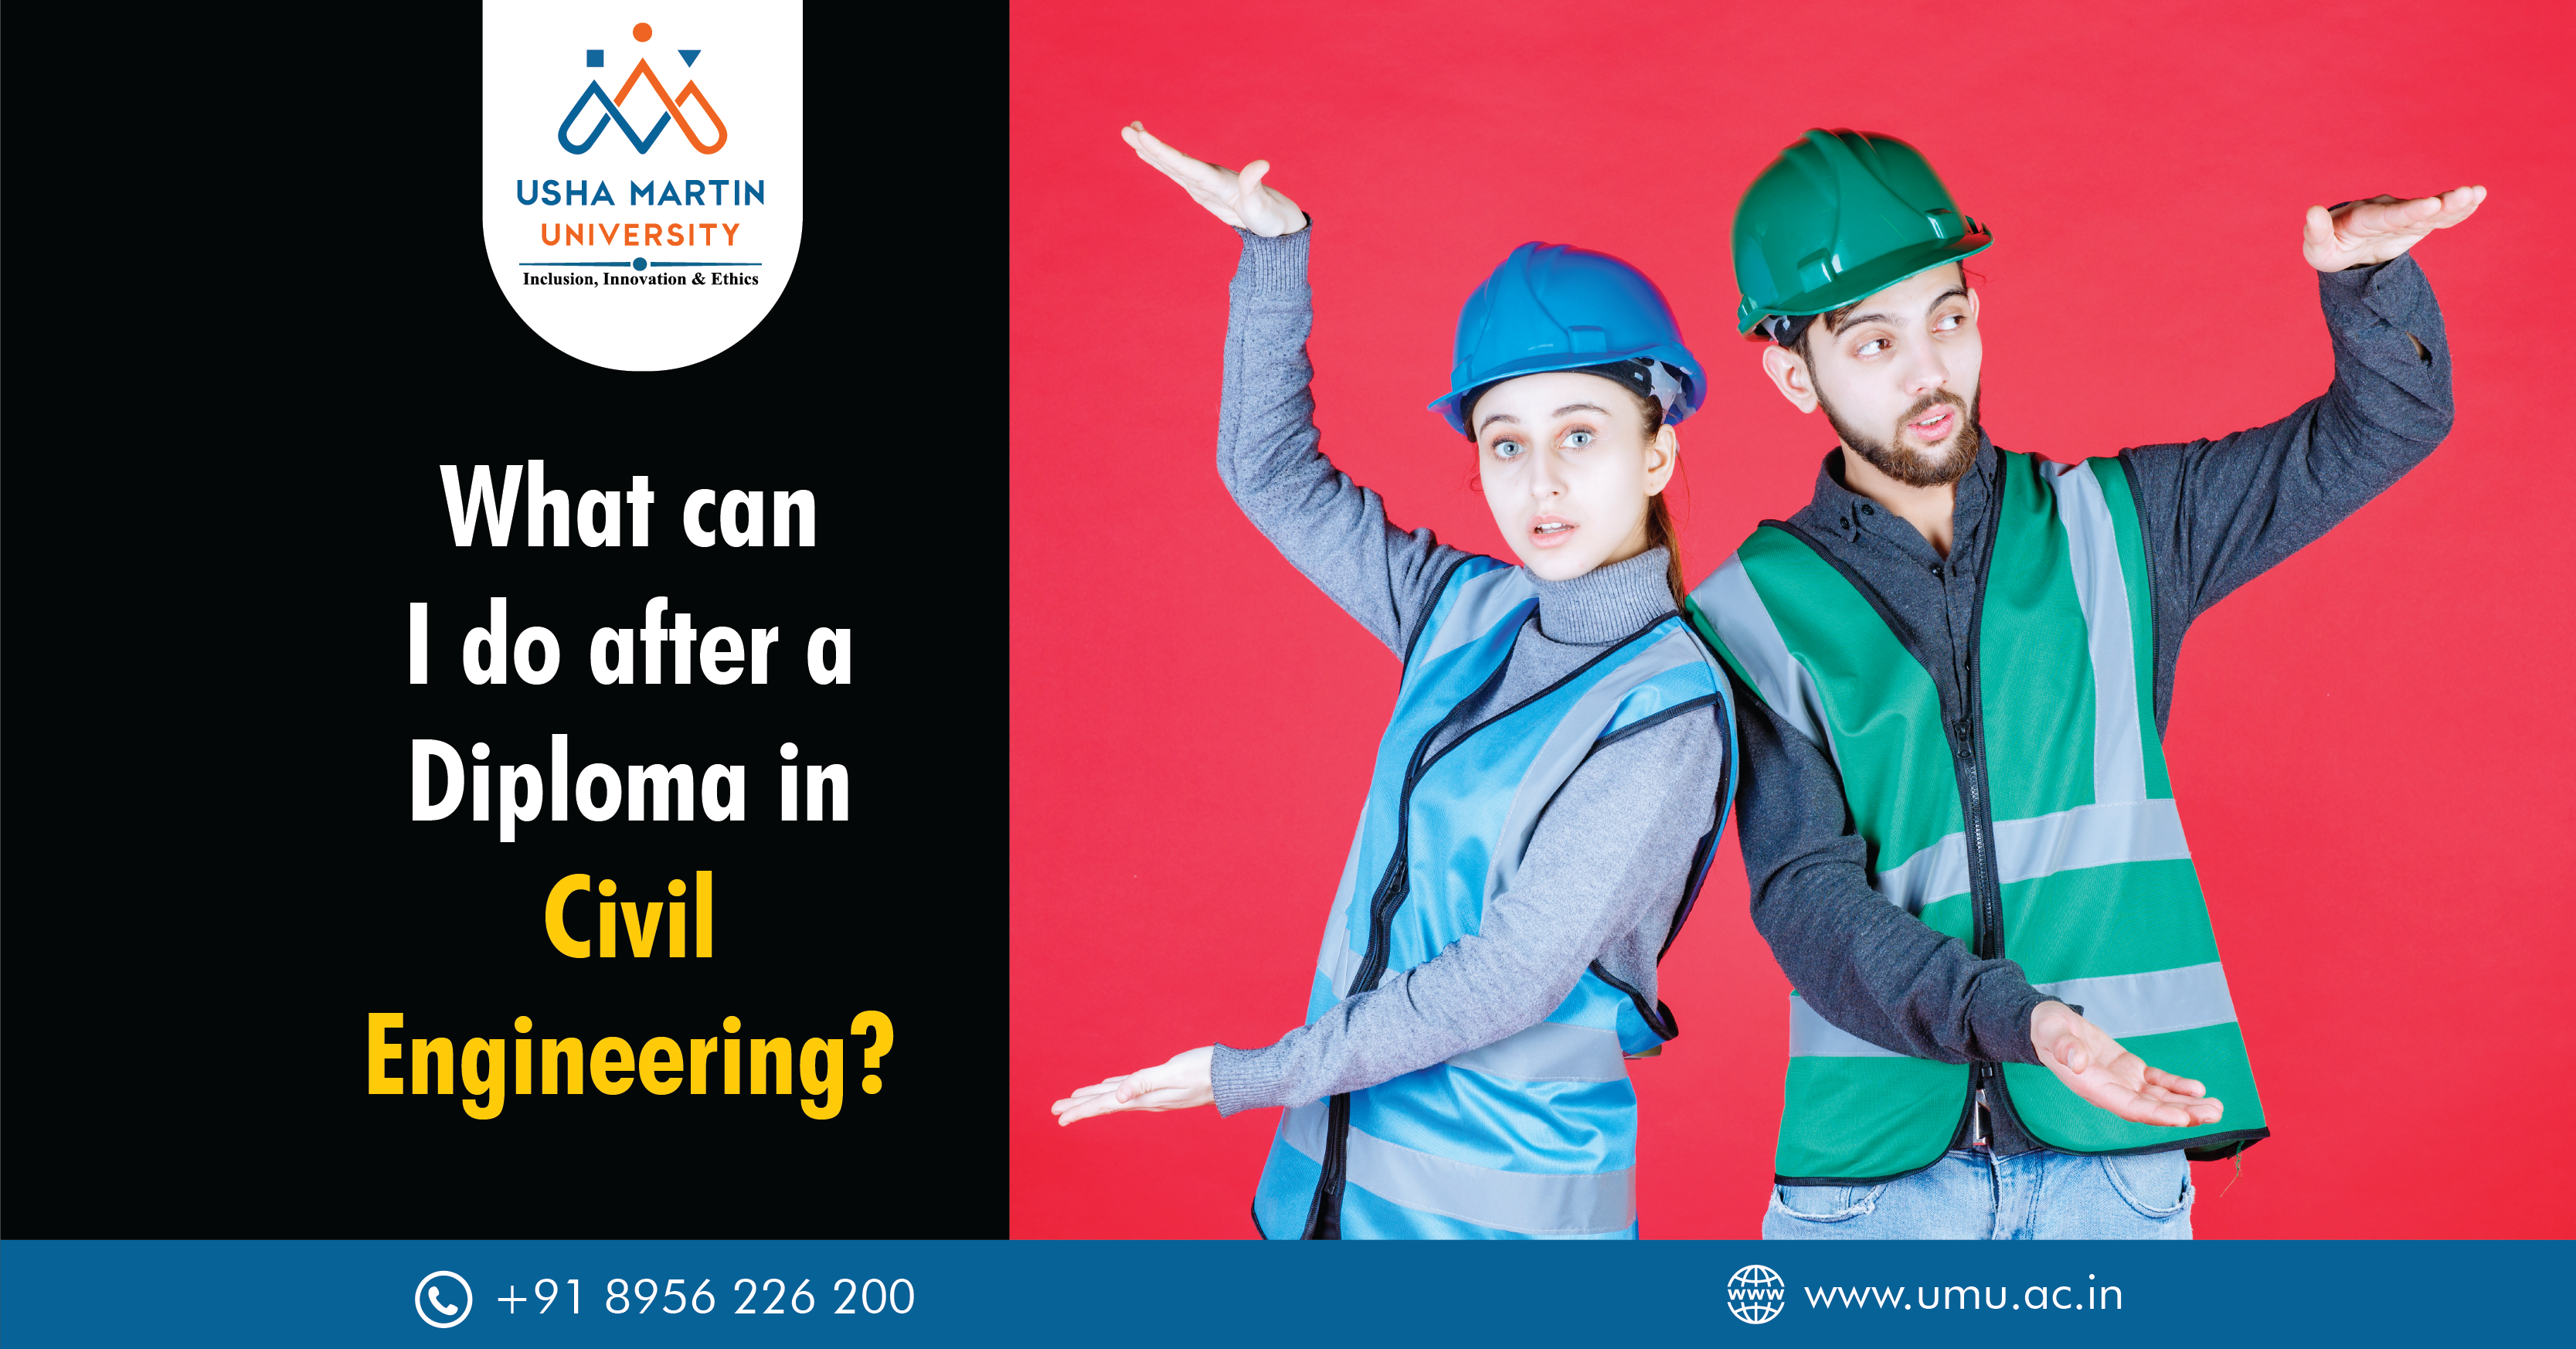 What can I do after a Diploma in Civil Engineering?